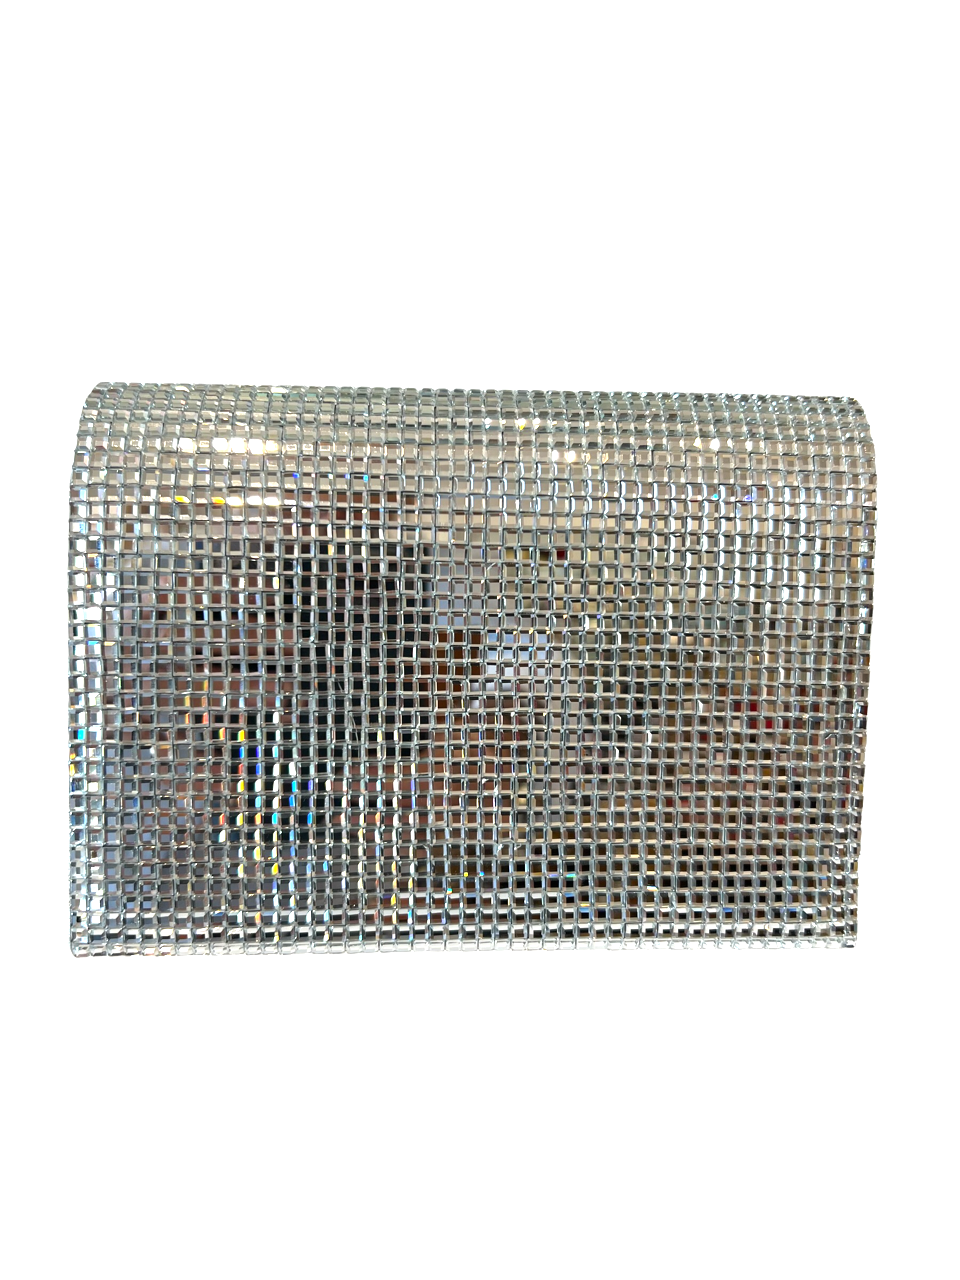 Lav-ish EBFISHER Bling Silver SEQUIN Evening Bag Clutch